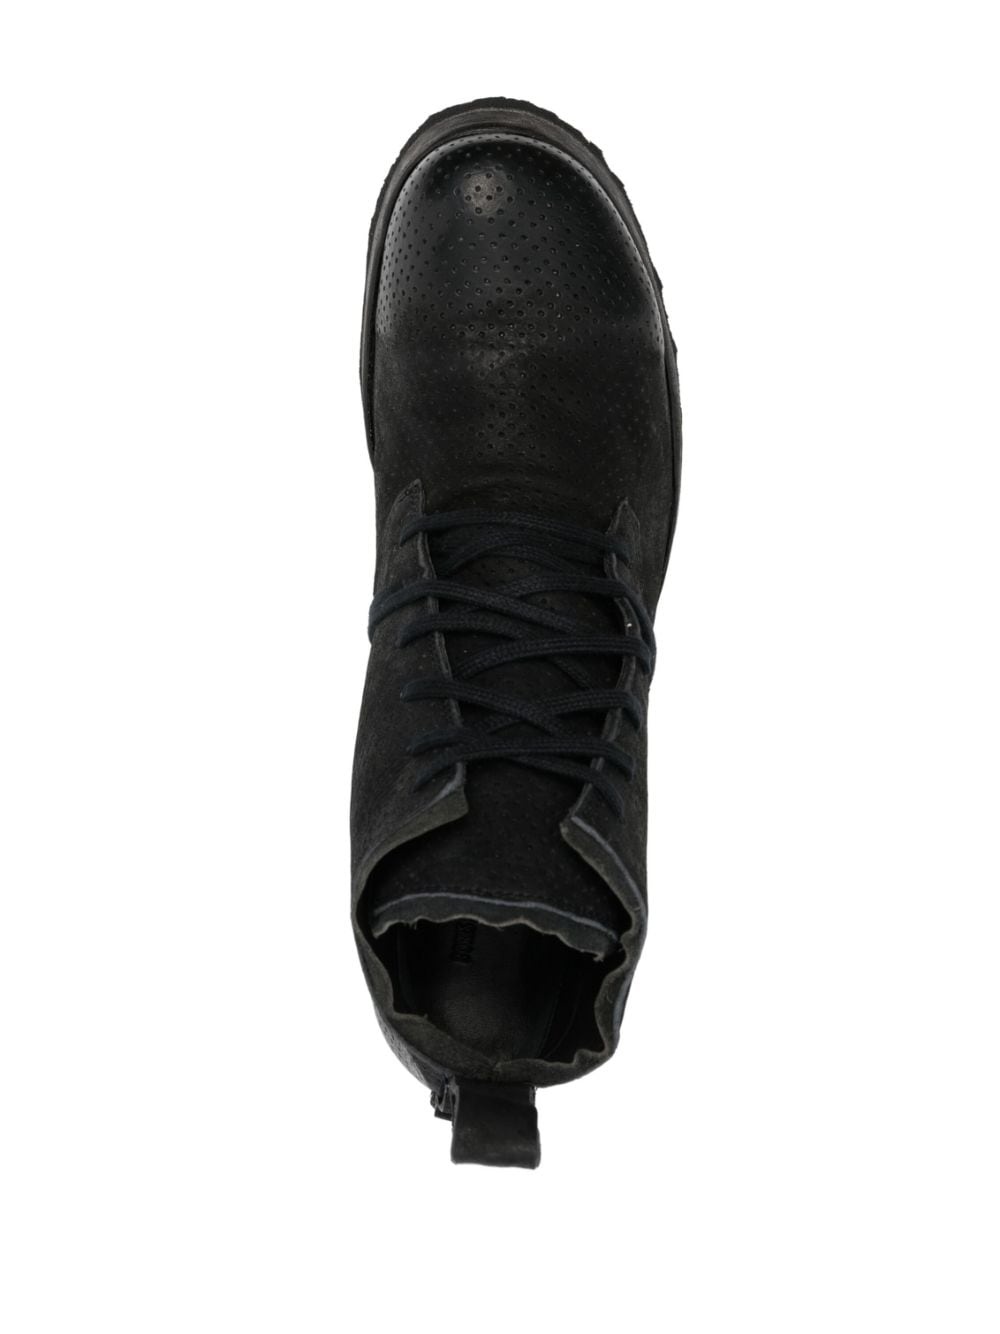 perforated leather boots - 4